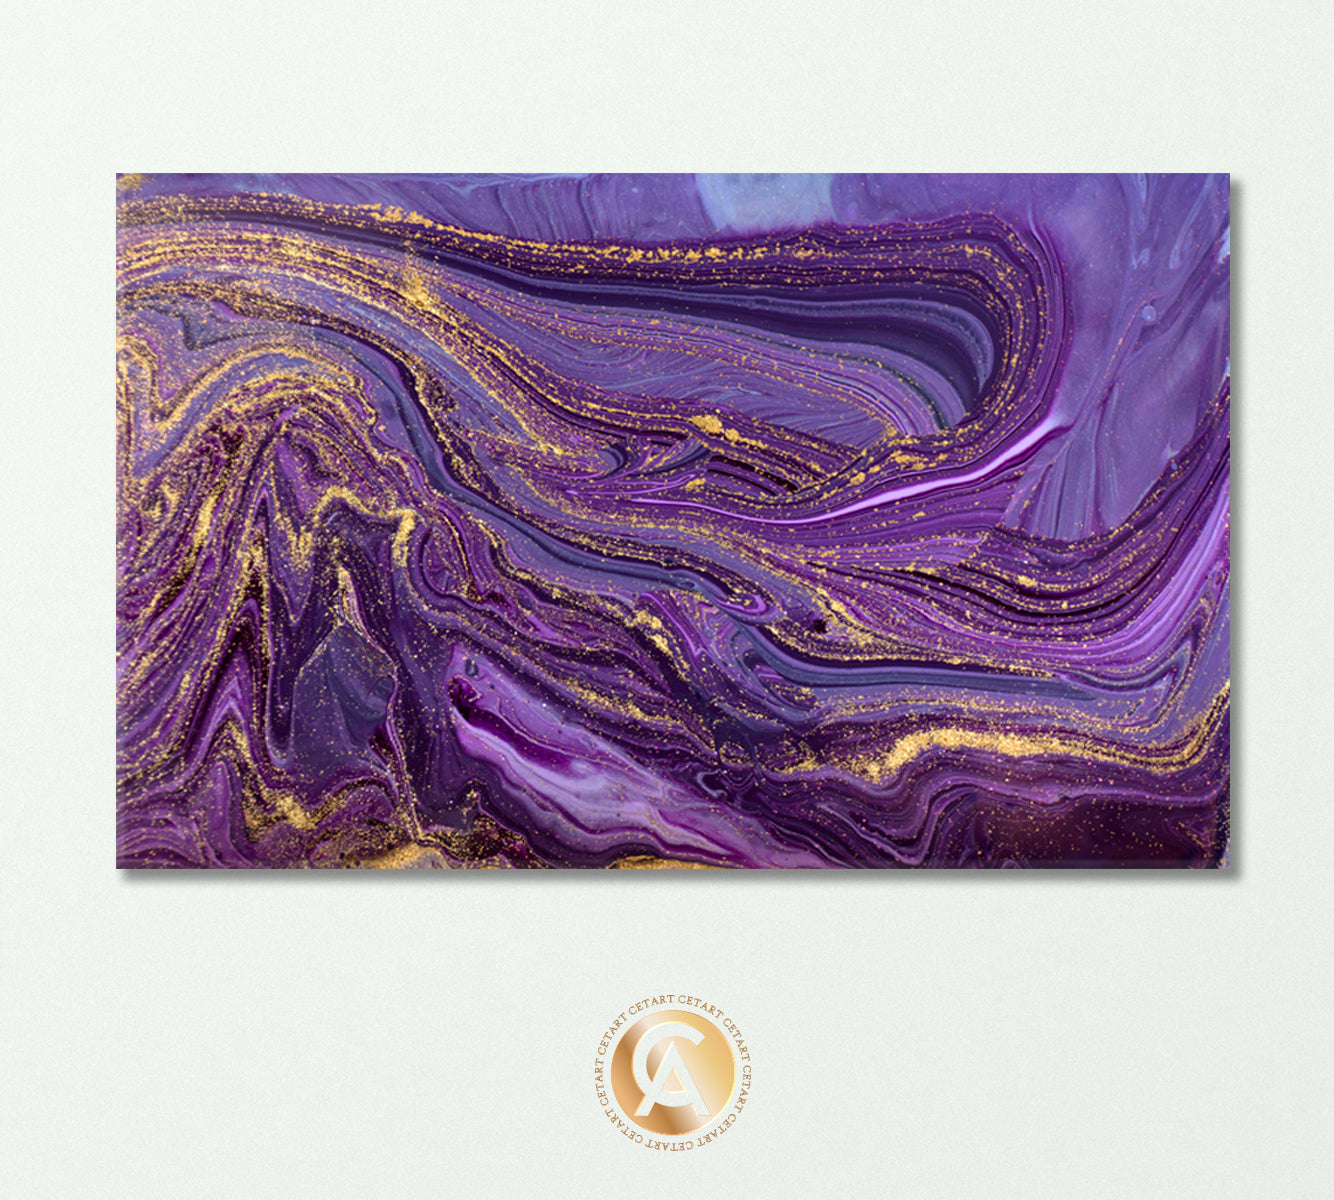 Marbling Pattern in Violet Colors Canvas Print-Canvas Print-CetArt-1 Panel-24x16 inches-CetArt